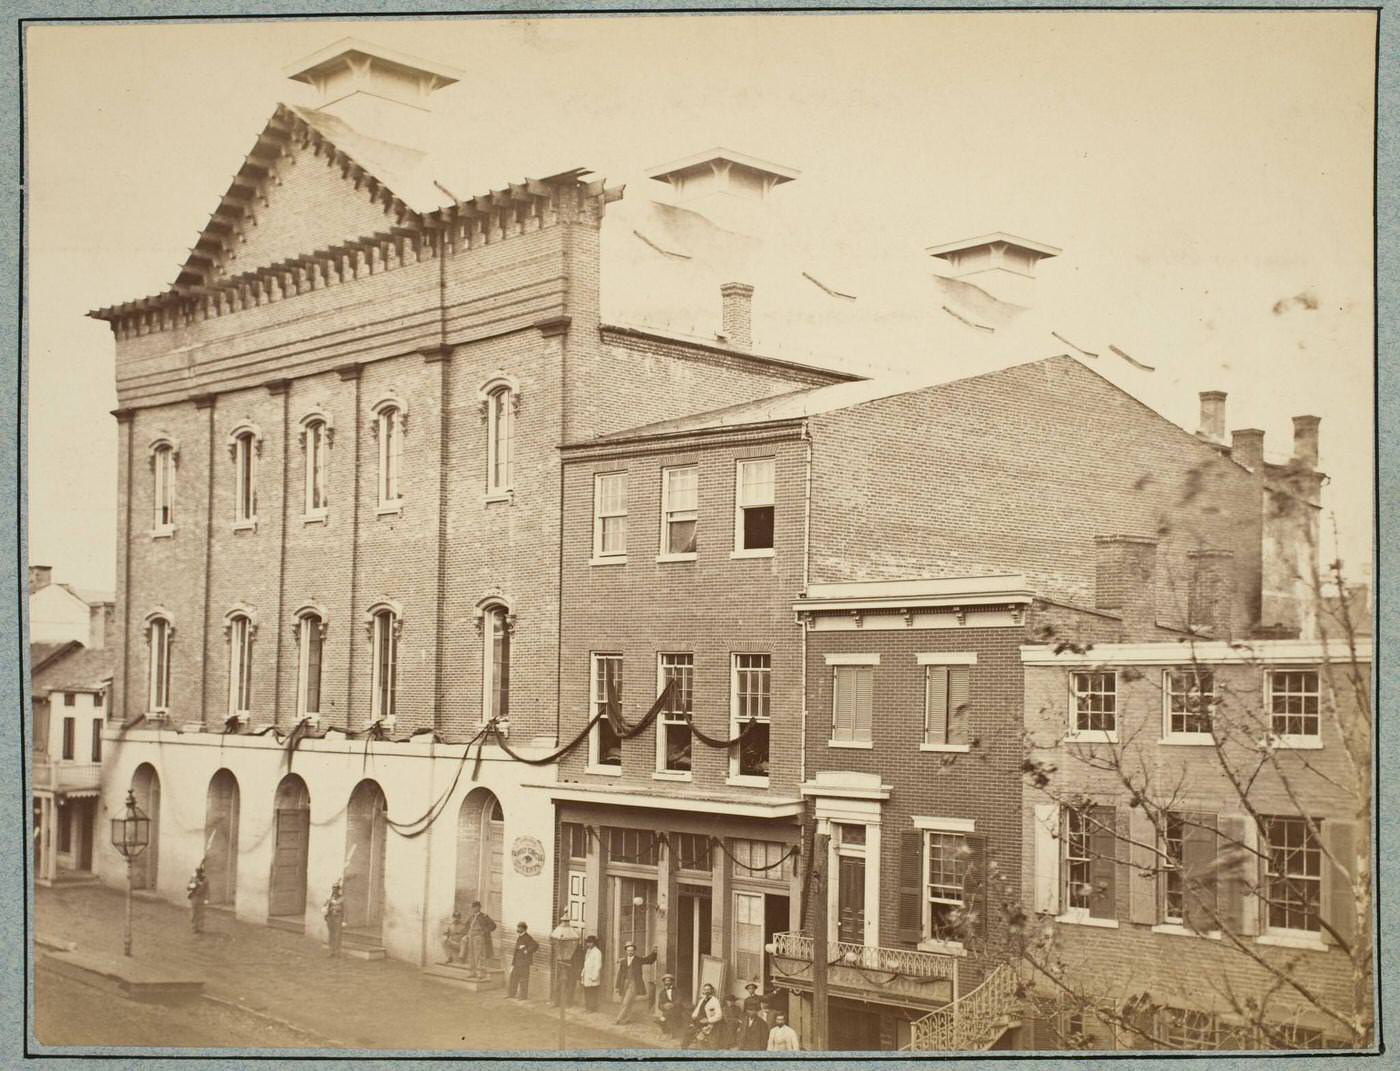 Exterior view of Ford's Theater in Washington, D.C., where President Lincoln was assassinated by the actor John Wilkes Booth, 1865.